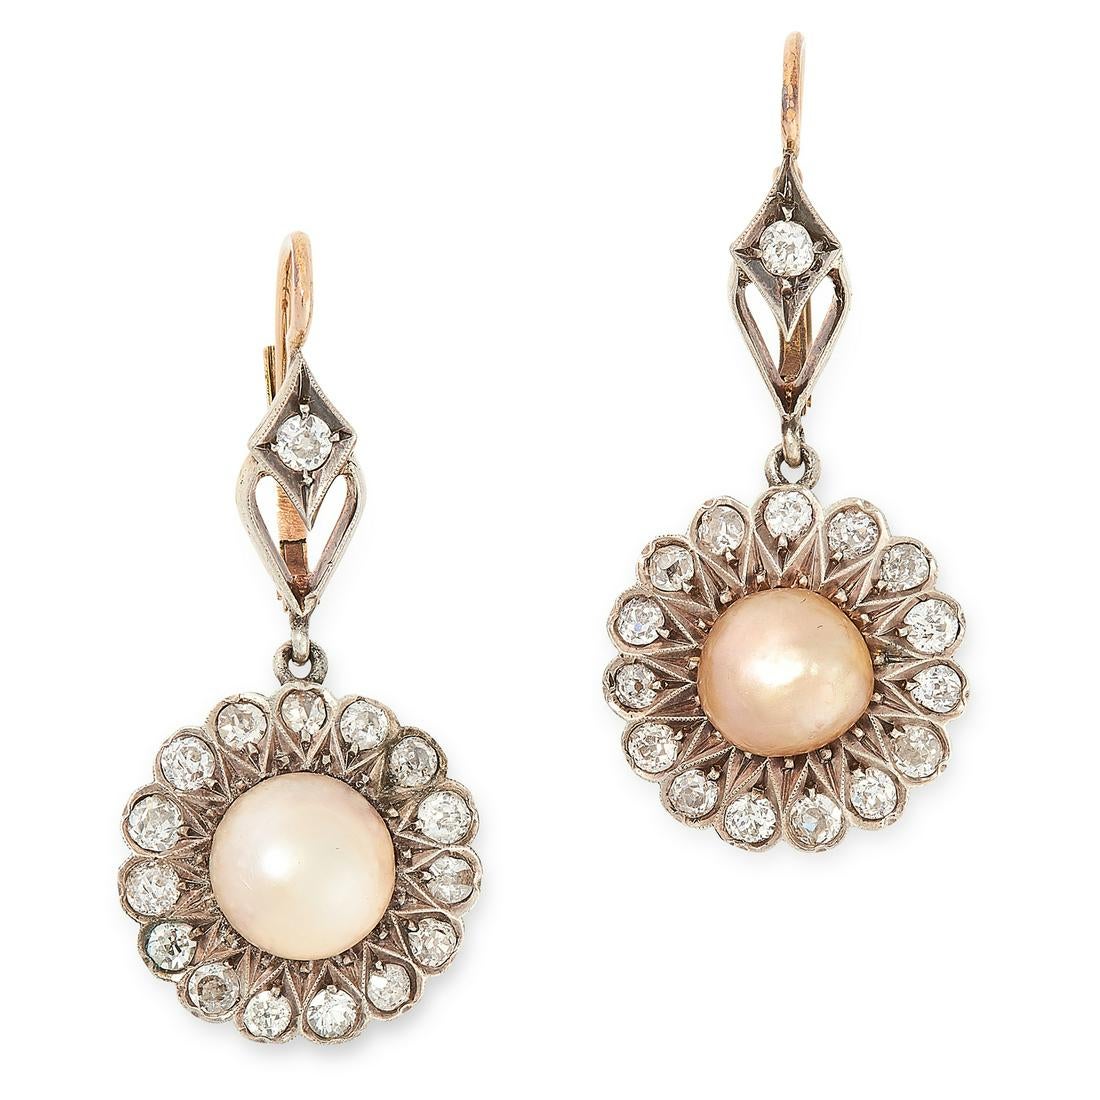 A PAIR OF ANTIQUE PEARL AND DIAMOND EARRINGS each